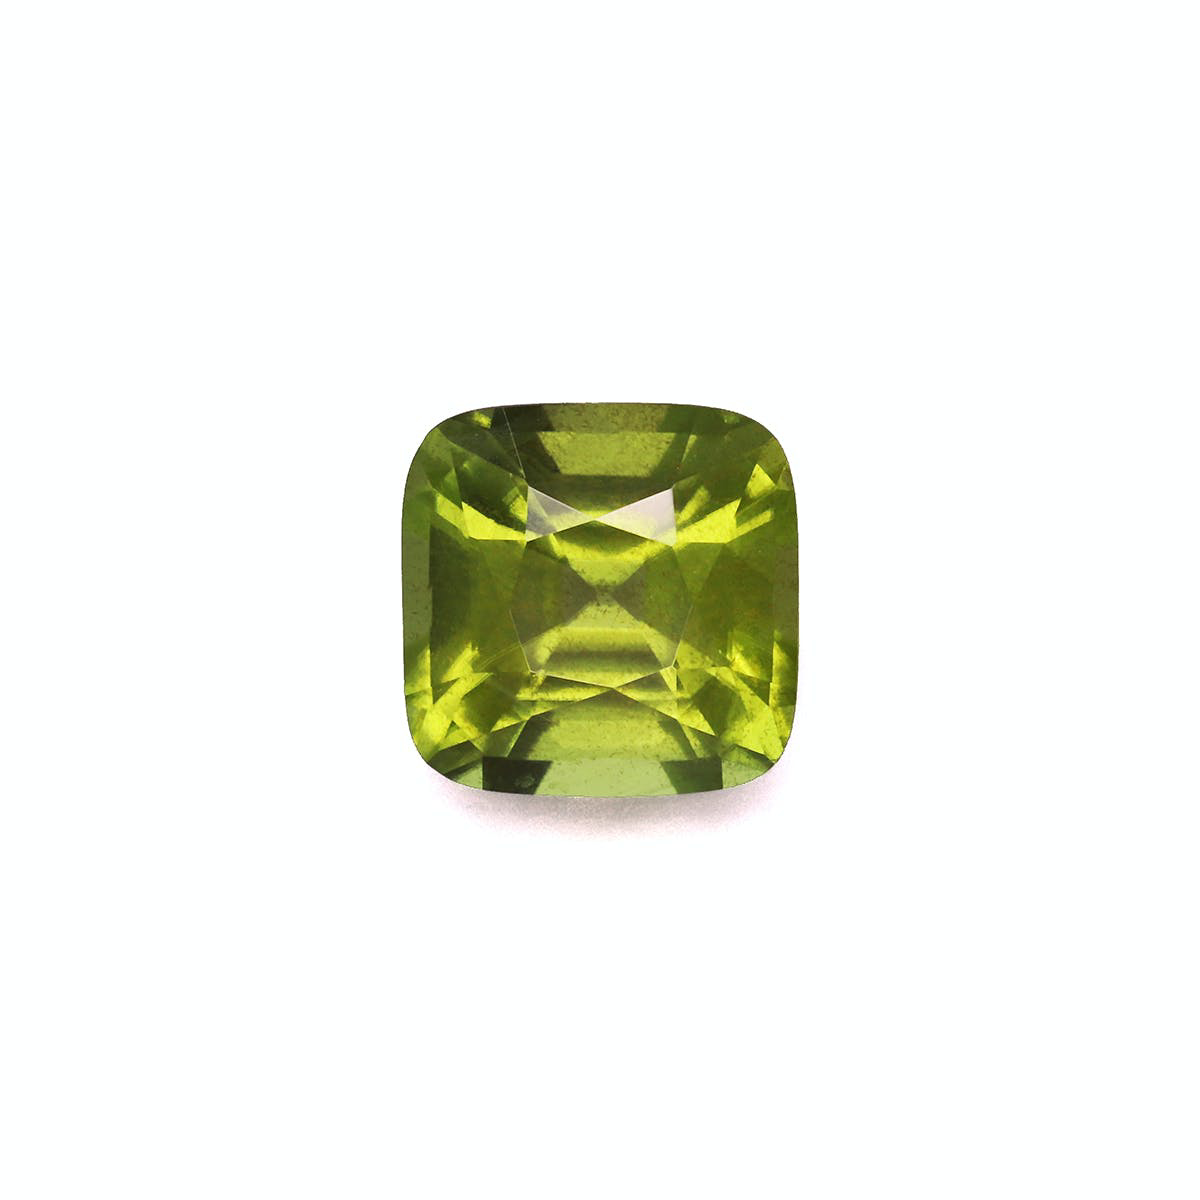 Picture of Lime Green Peridot 3.98ct - 9mm (PD0115)